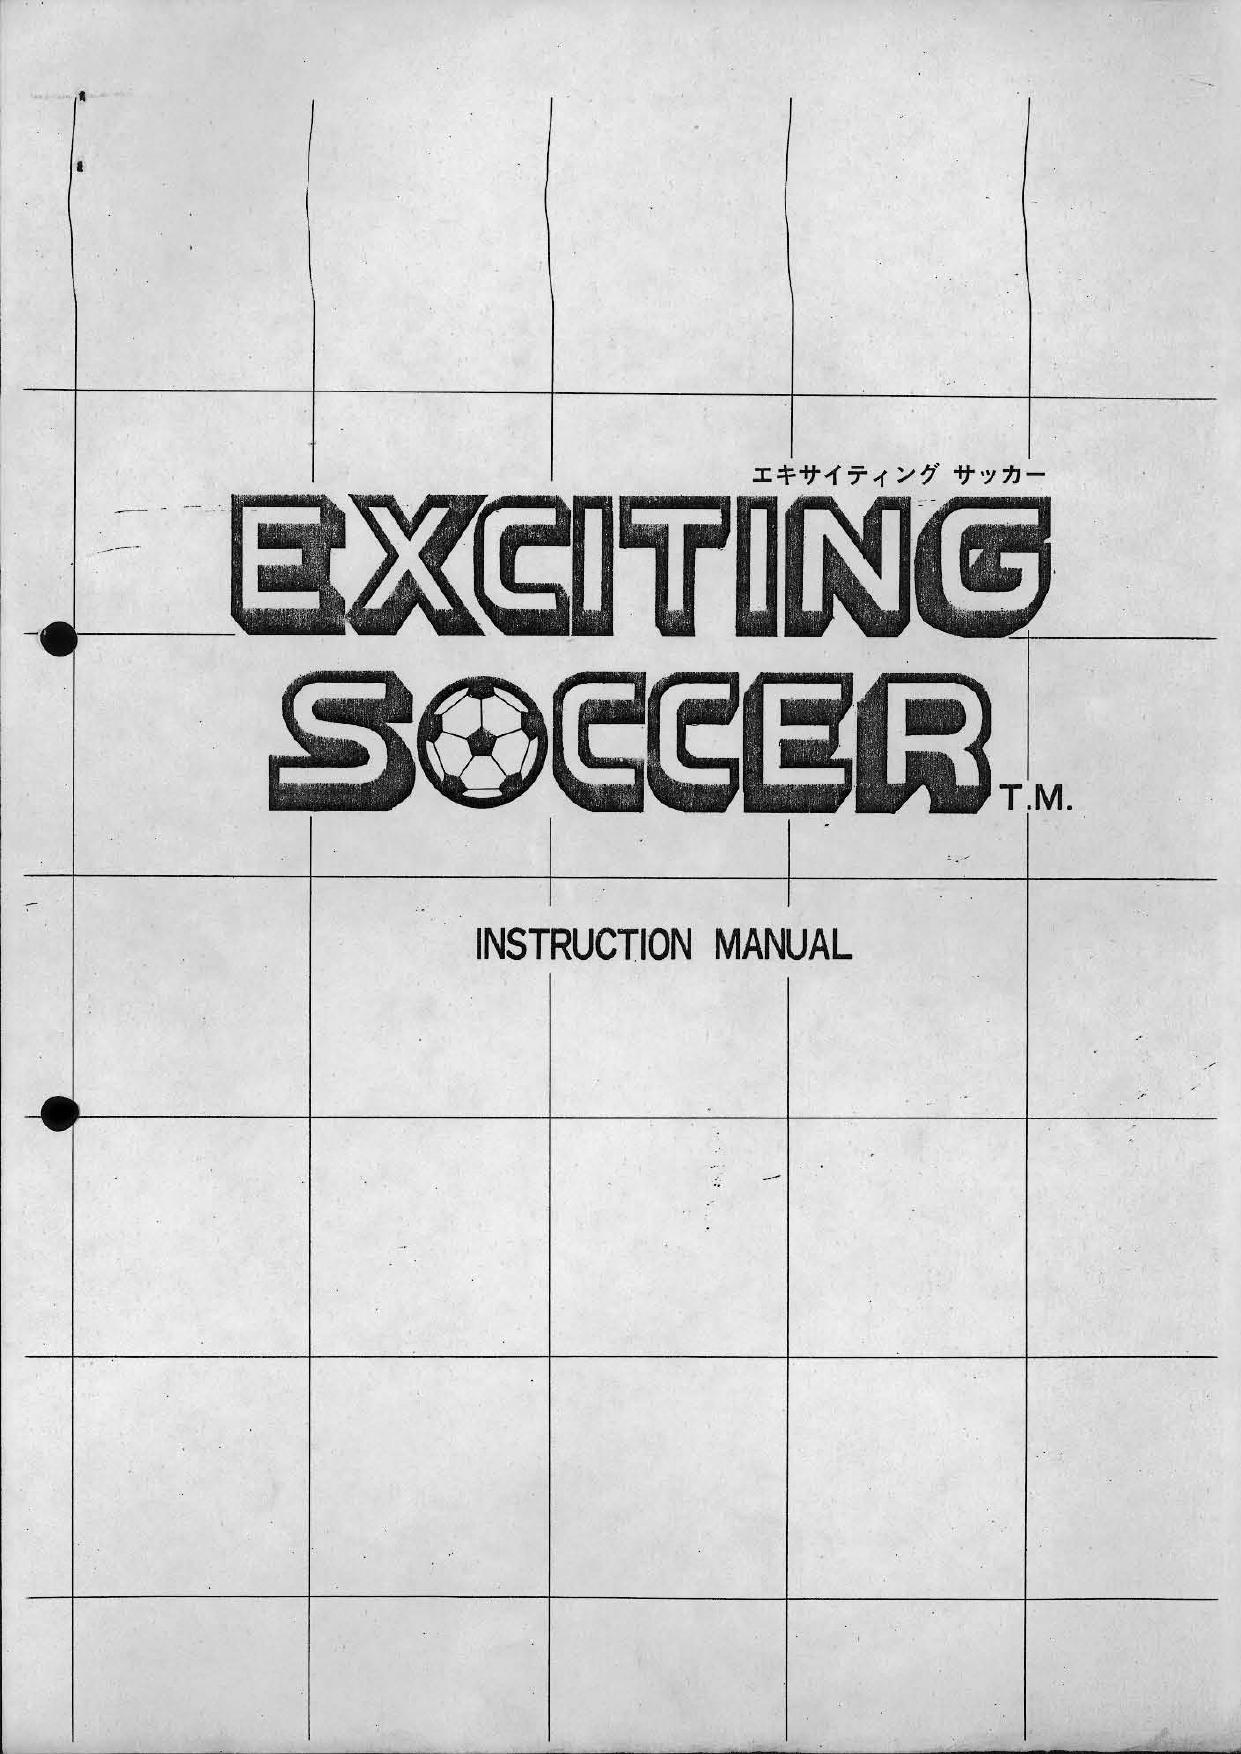 EXCITING SOCCER